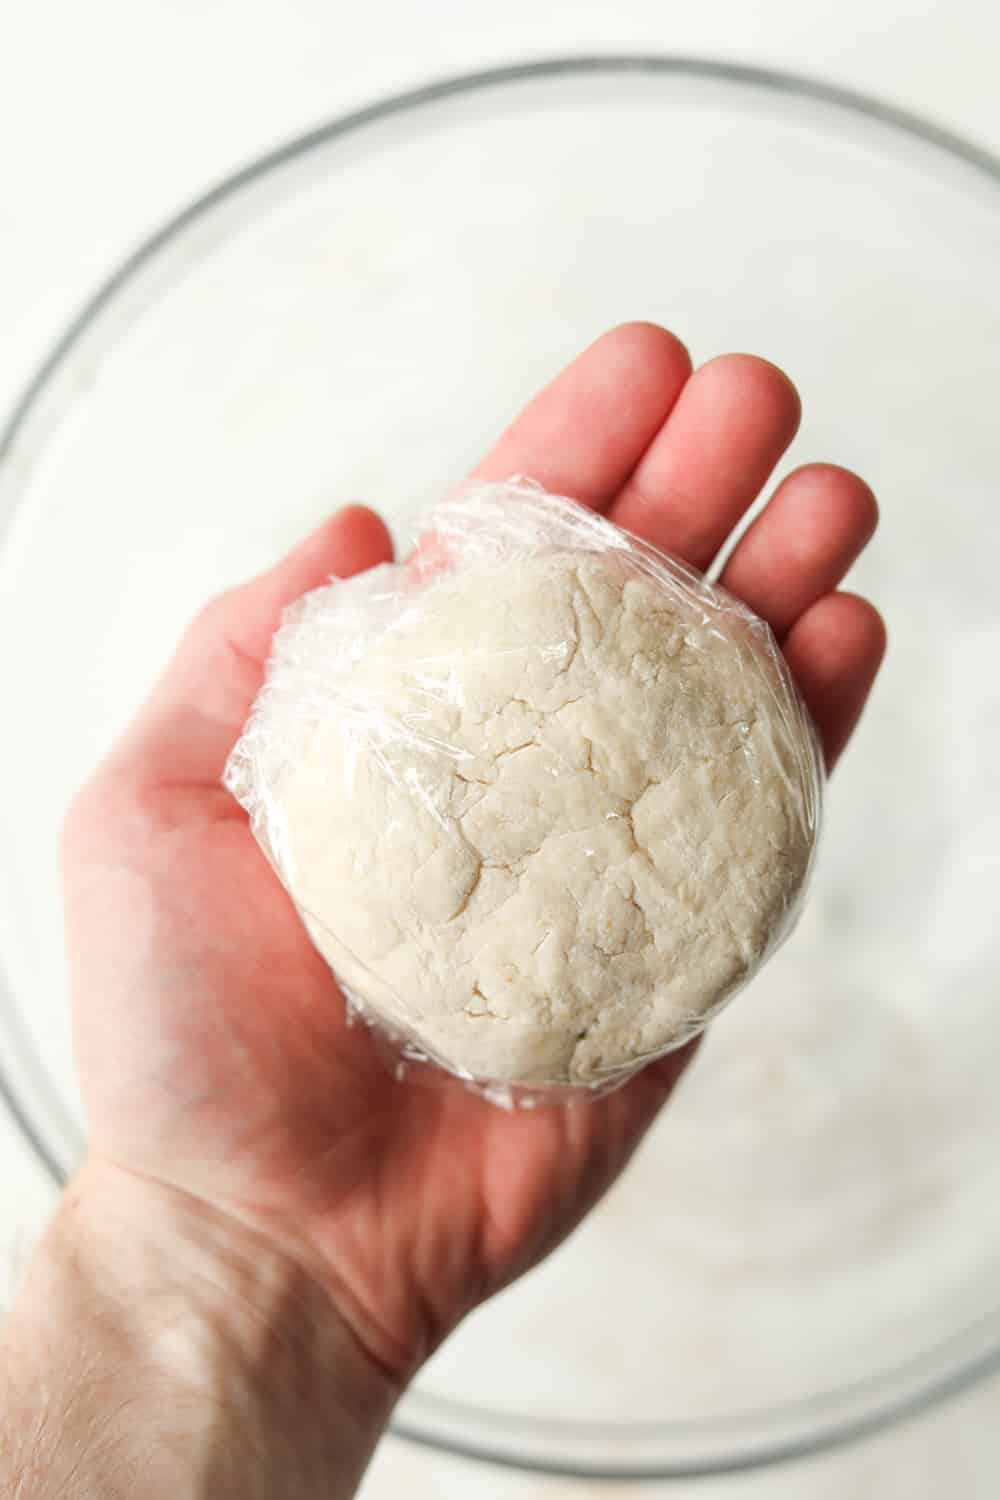 A ball of pizza dough wrapped in plastic wrap.